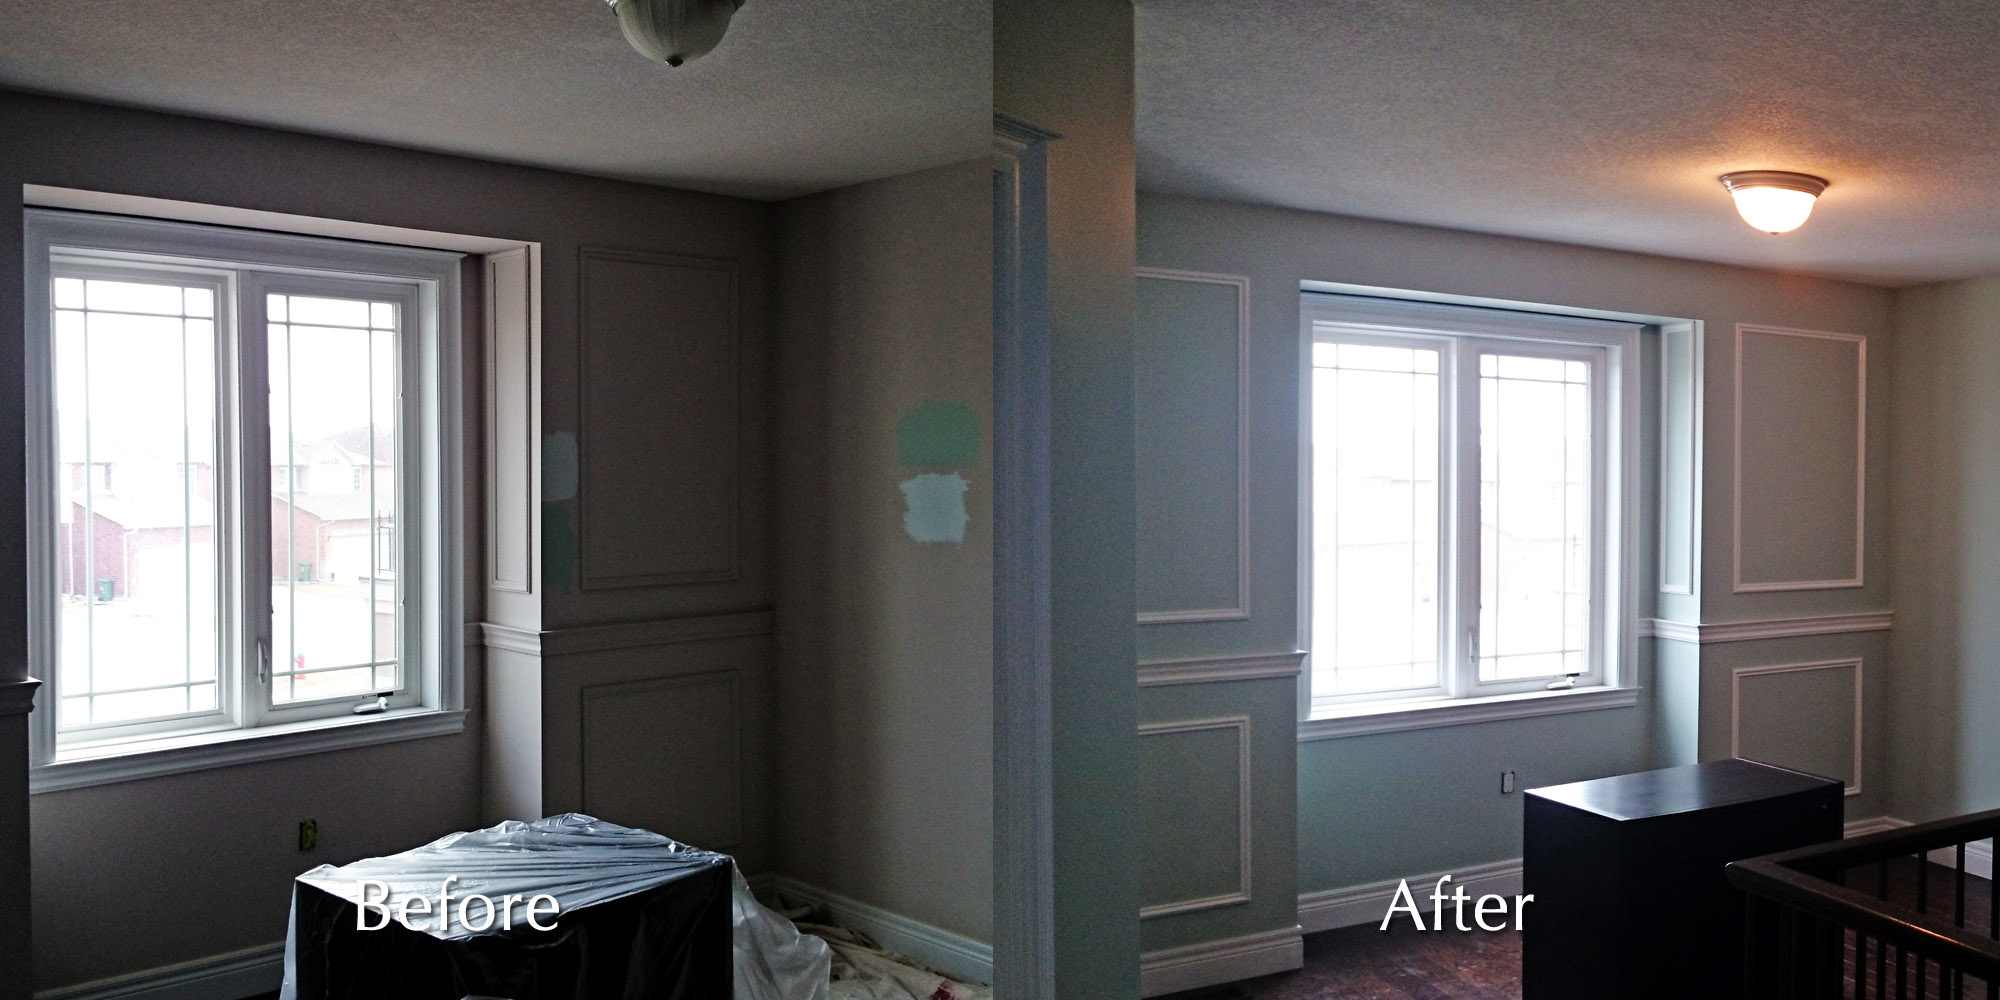 Trim and walls of a house landing painted by Moncast - Before & After